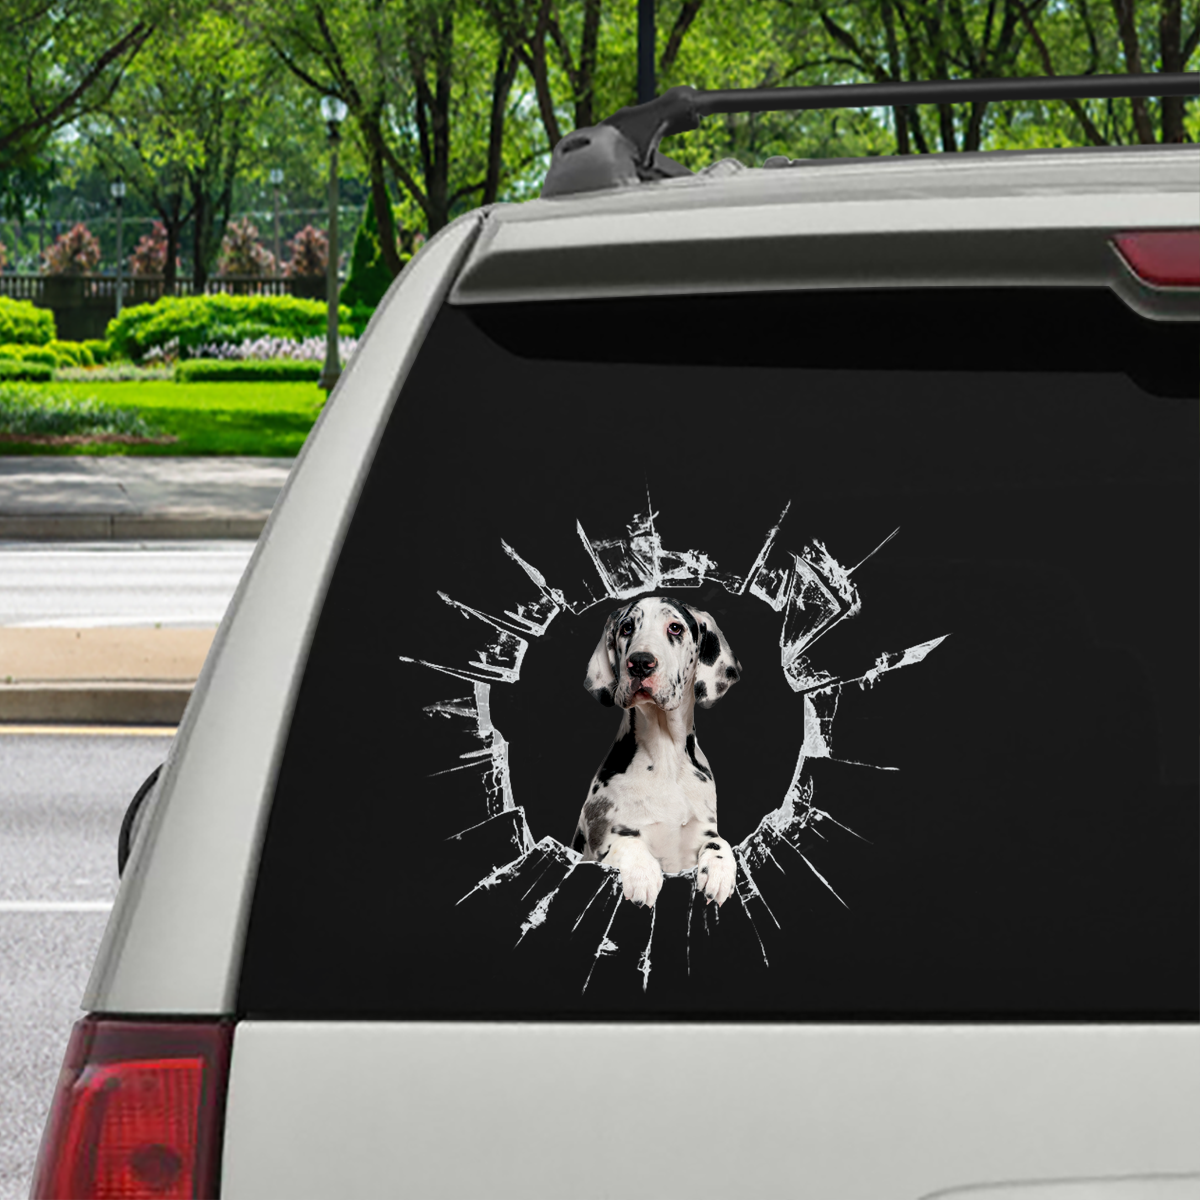 Get In - It's Time For Shopping - Great Dane Car Sticker V1